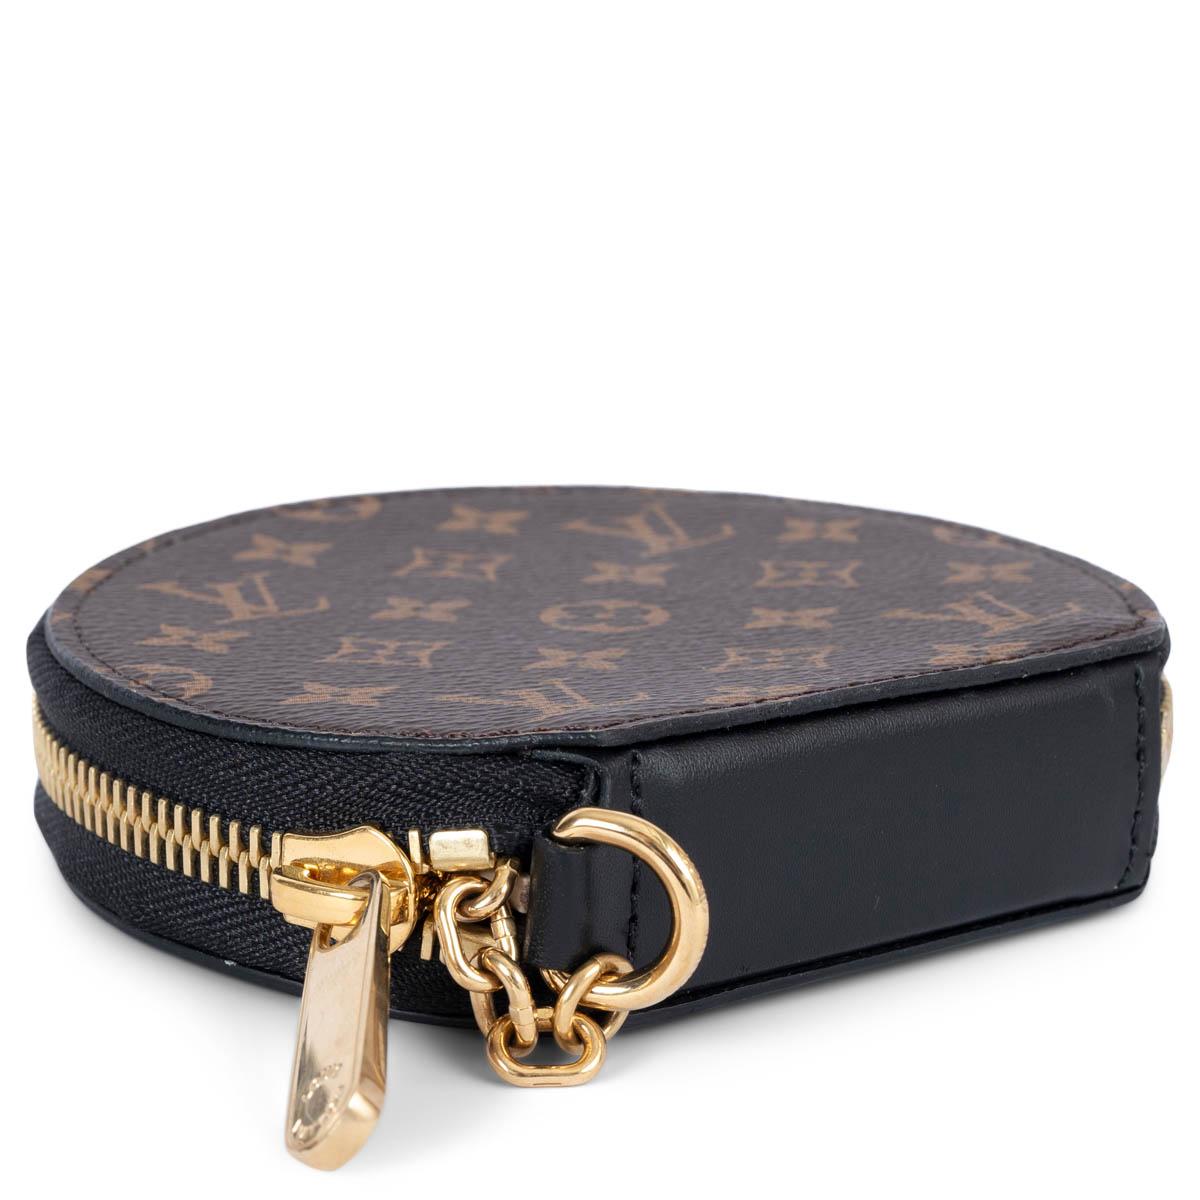 100% authentic Louis Vuitton Micro Boite Chapeau in brown Monogram canvas with gold-tone metal hook & chain. This hatbox inspired currency purse is crafted of Louis Vuitton Monogram canvas, accented with black calfskin leather on the reverse. Lined